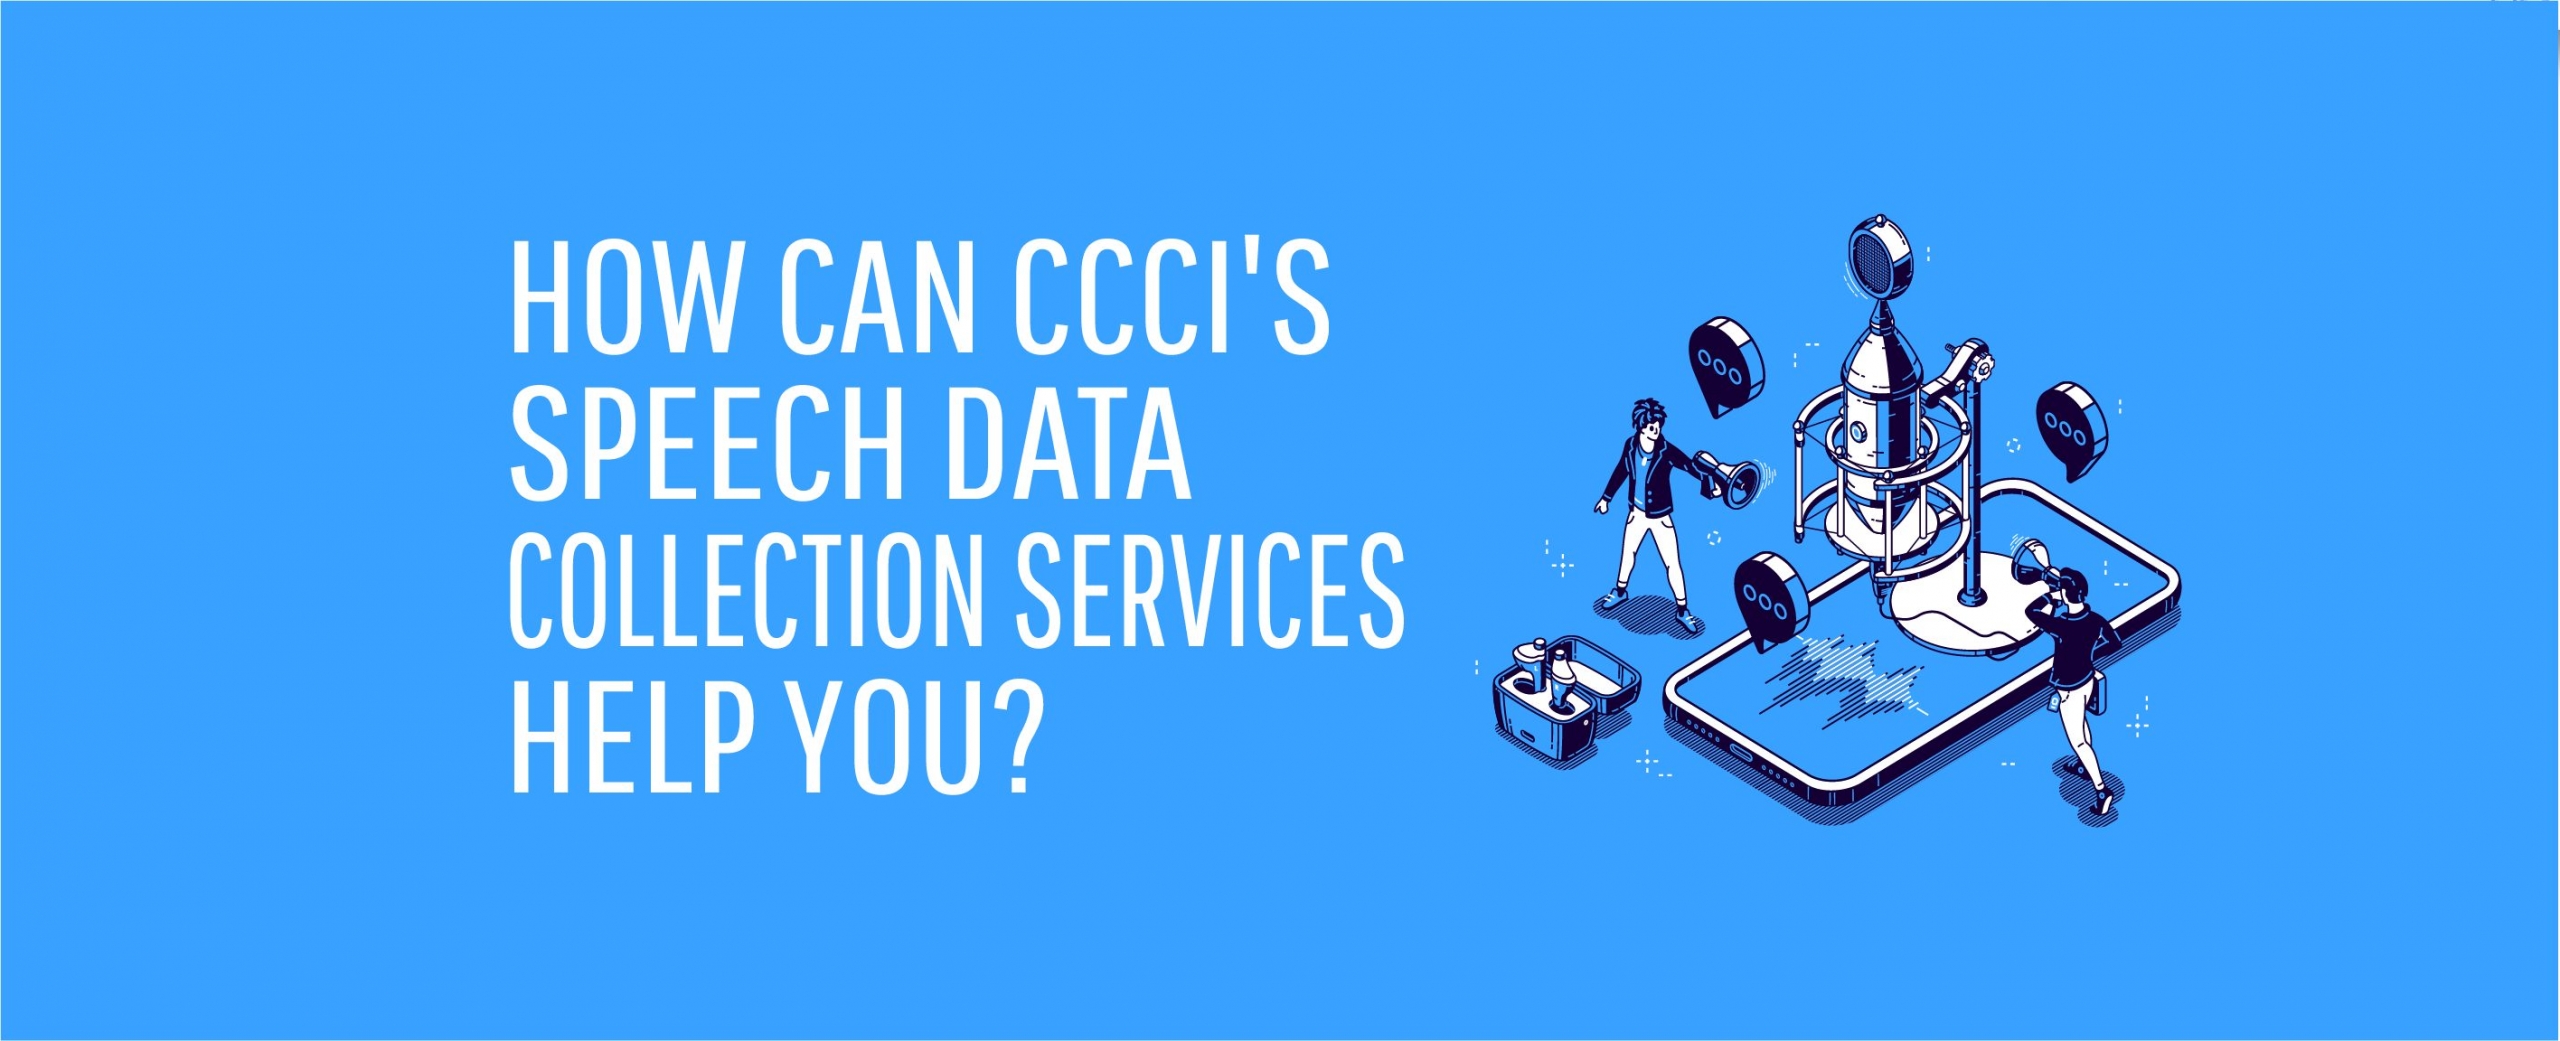 How can CCCI's speech and audio data collection help you